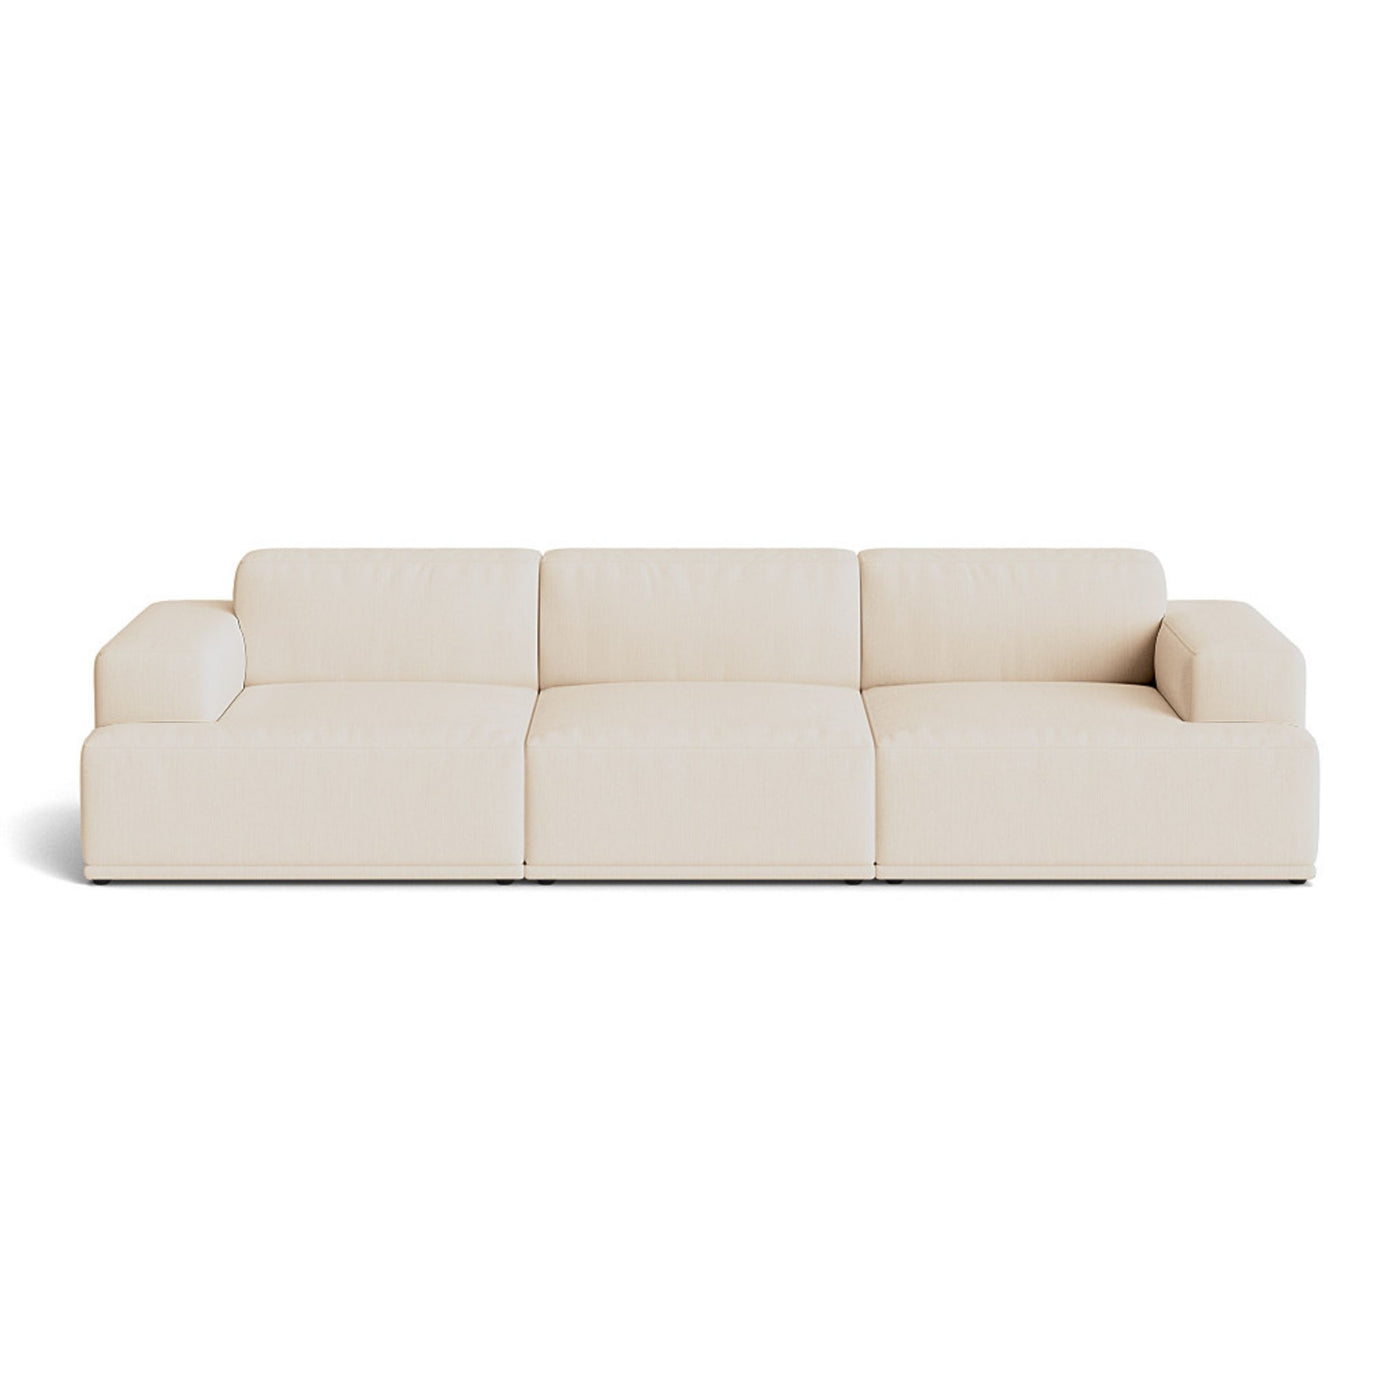 Muuto Connect Soft Modular 3 Seater Sofa, configuration 1. Made-to-order from someday designs. #colour_balder-612